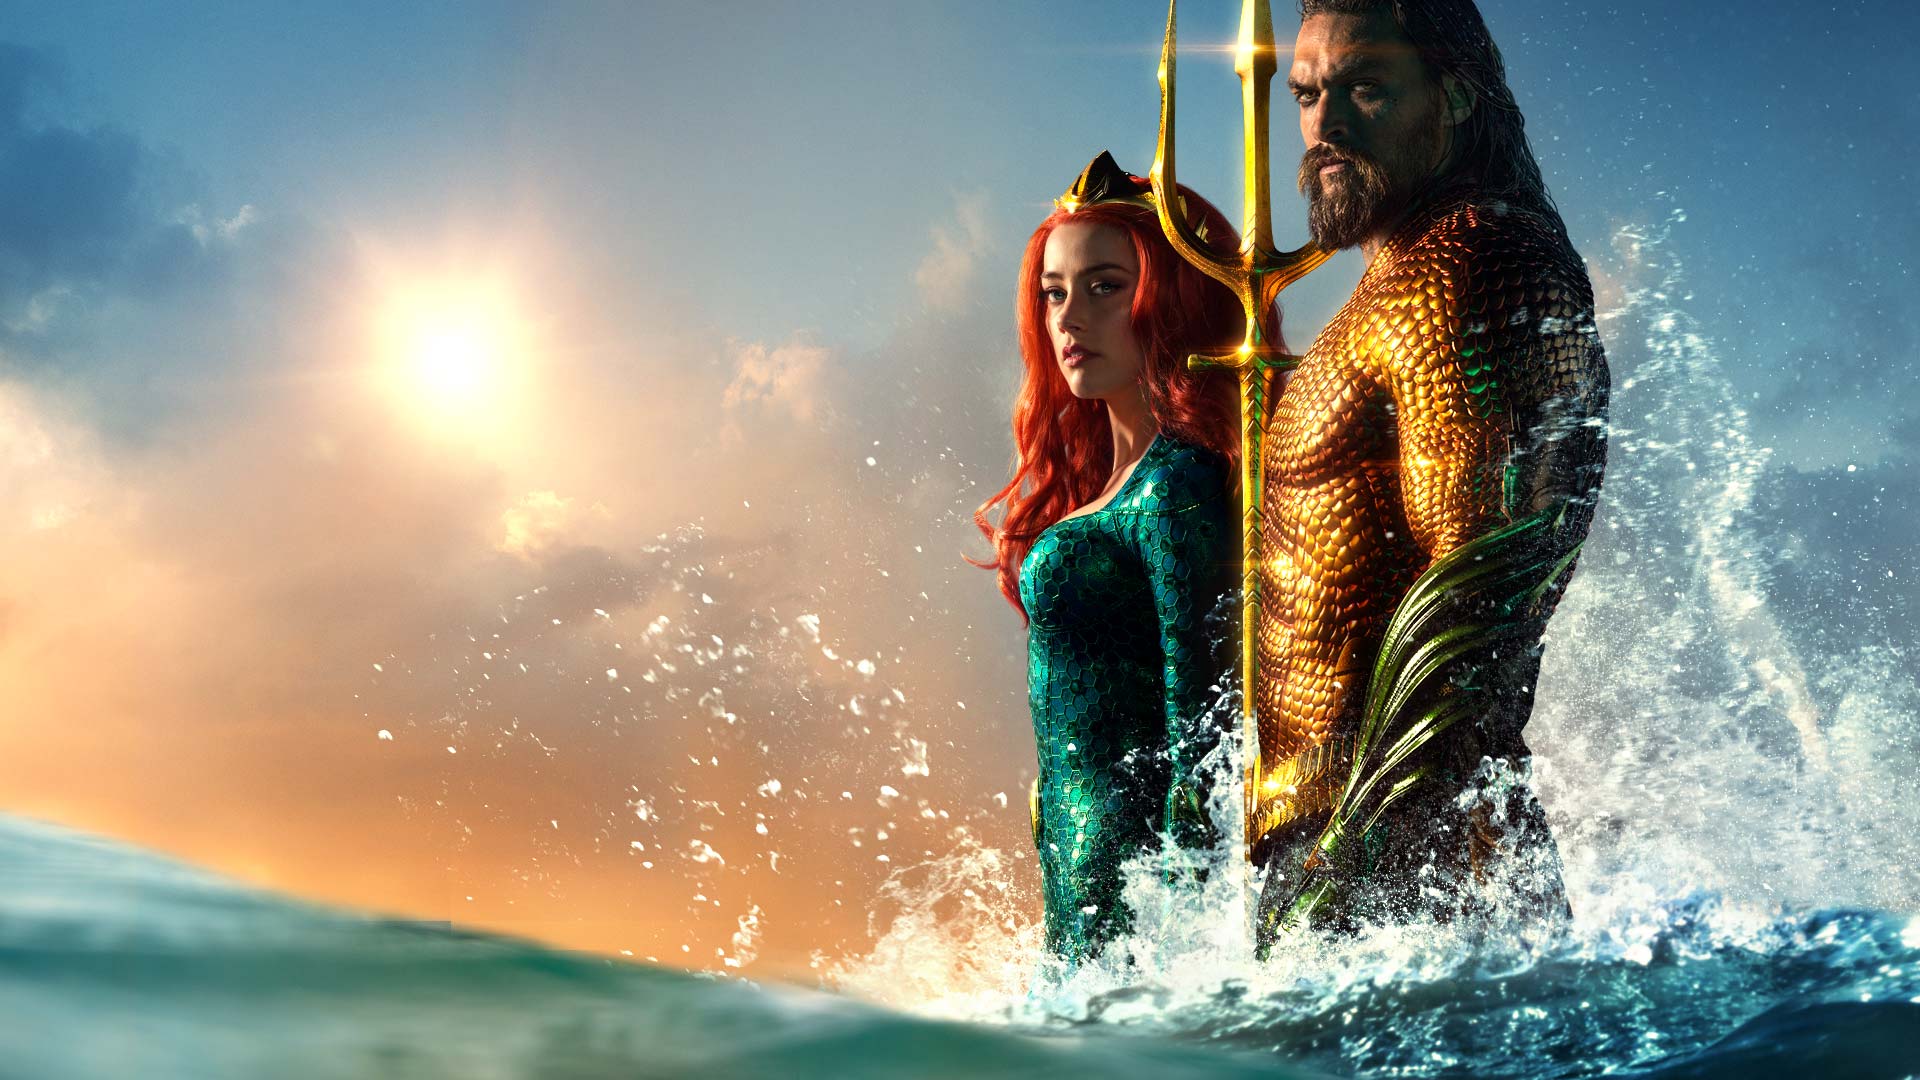 Aquaman' is loud, shallow and utterly entertaining. Ready Steady Cut